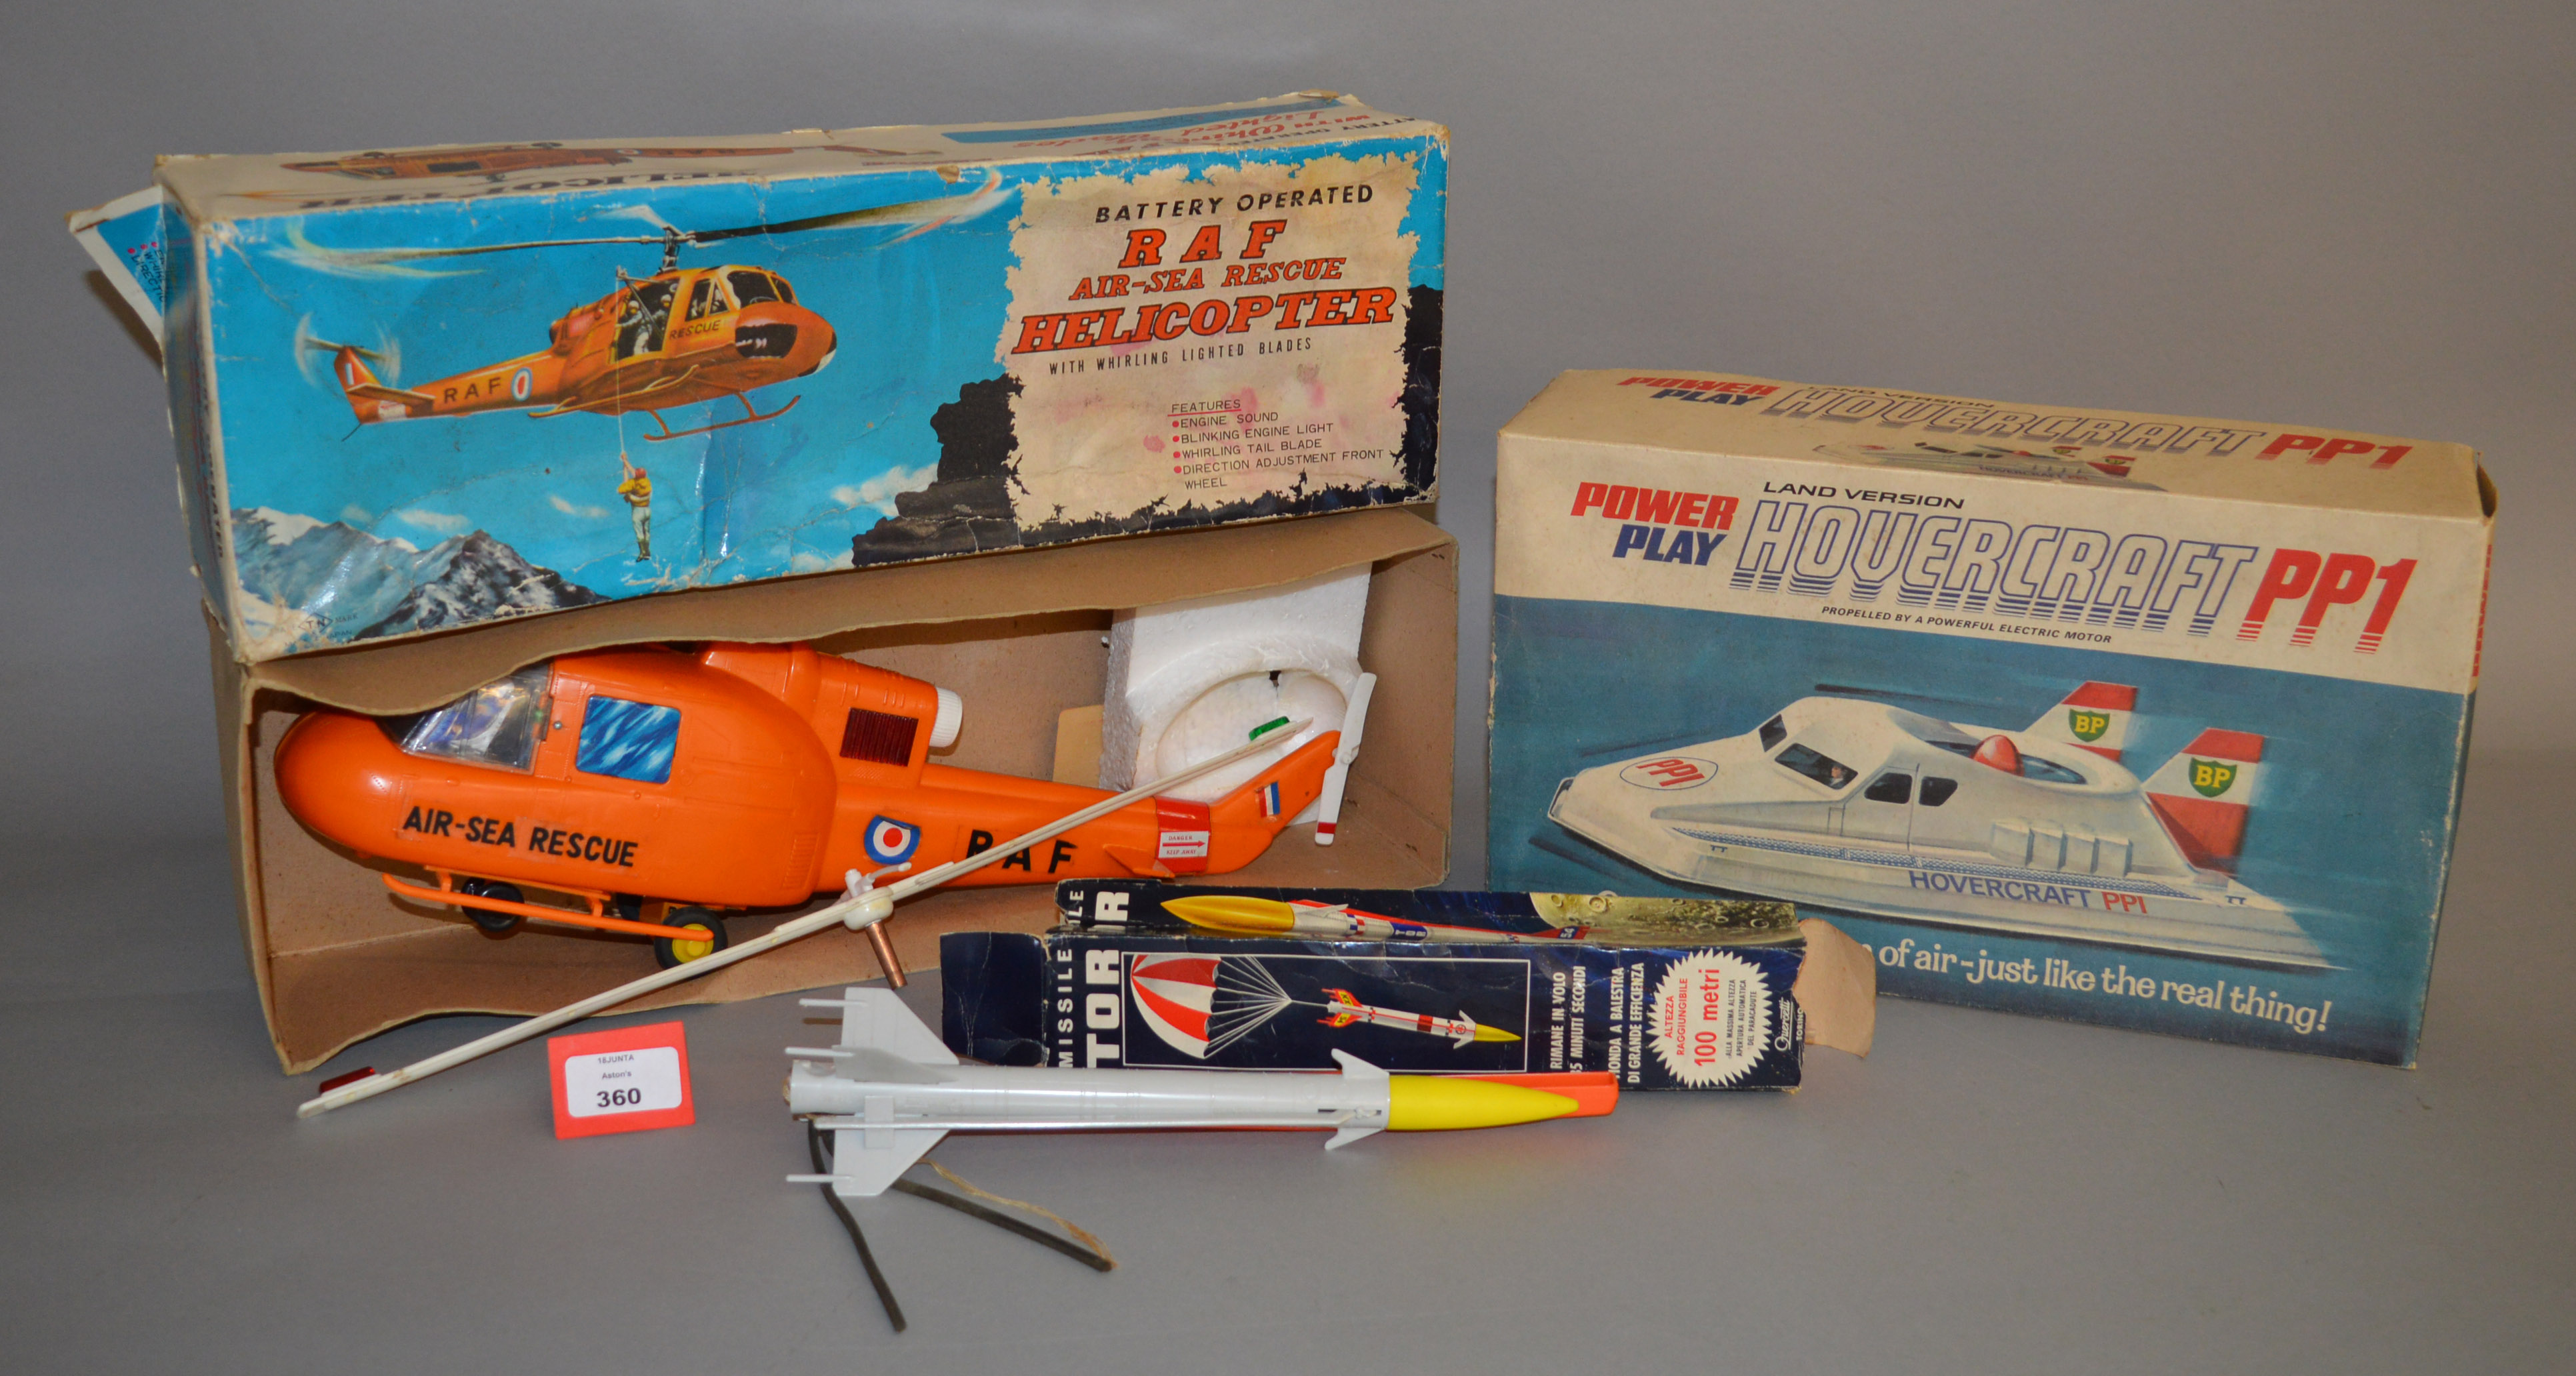 Mixed lot: Battery Operated RAF Air Sea Rescue Helicopter; Power Play Hovercraft PP1;